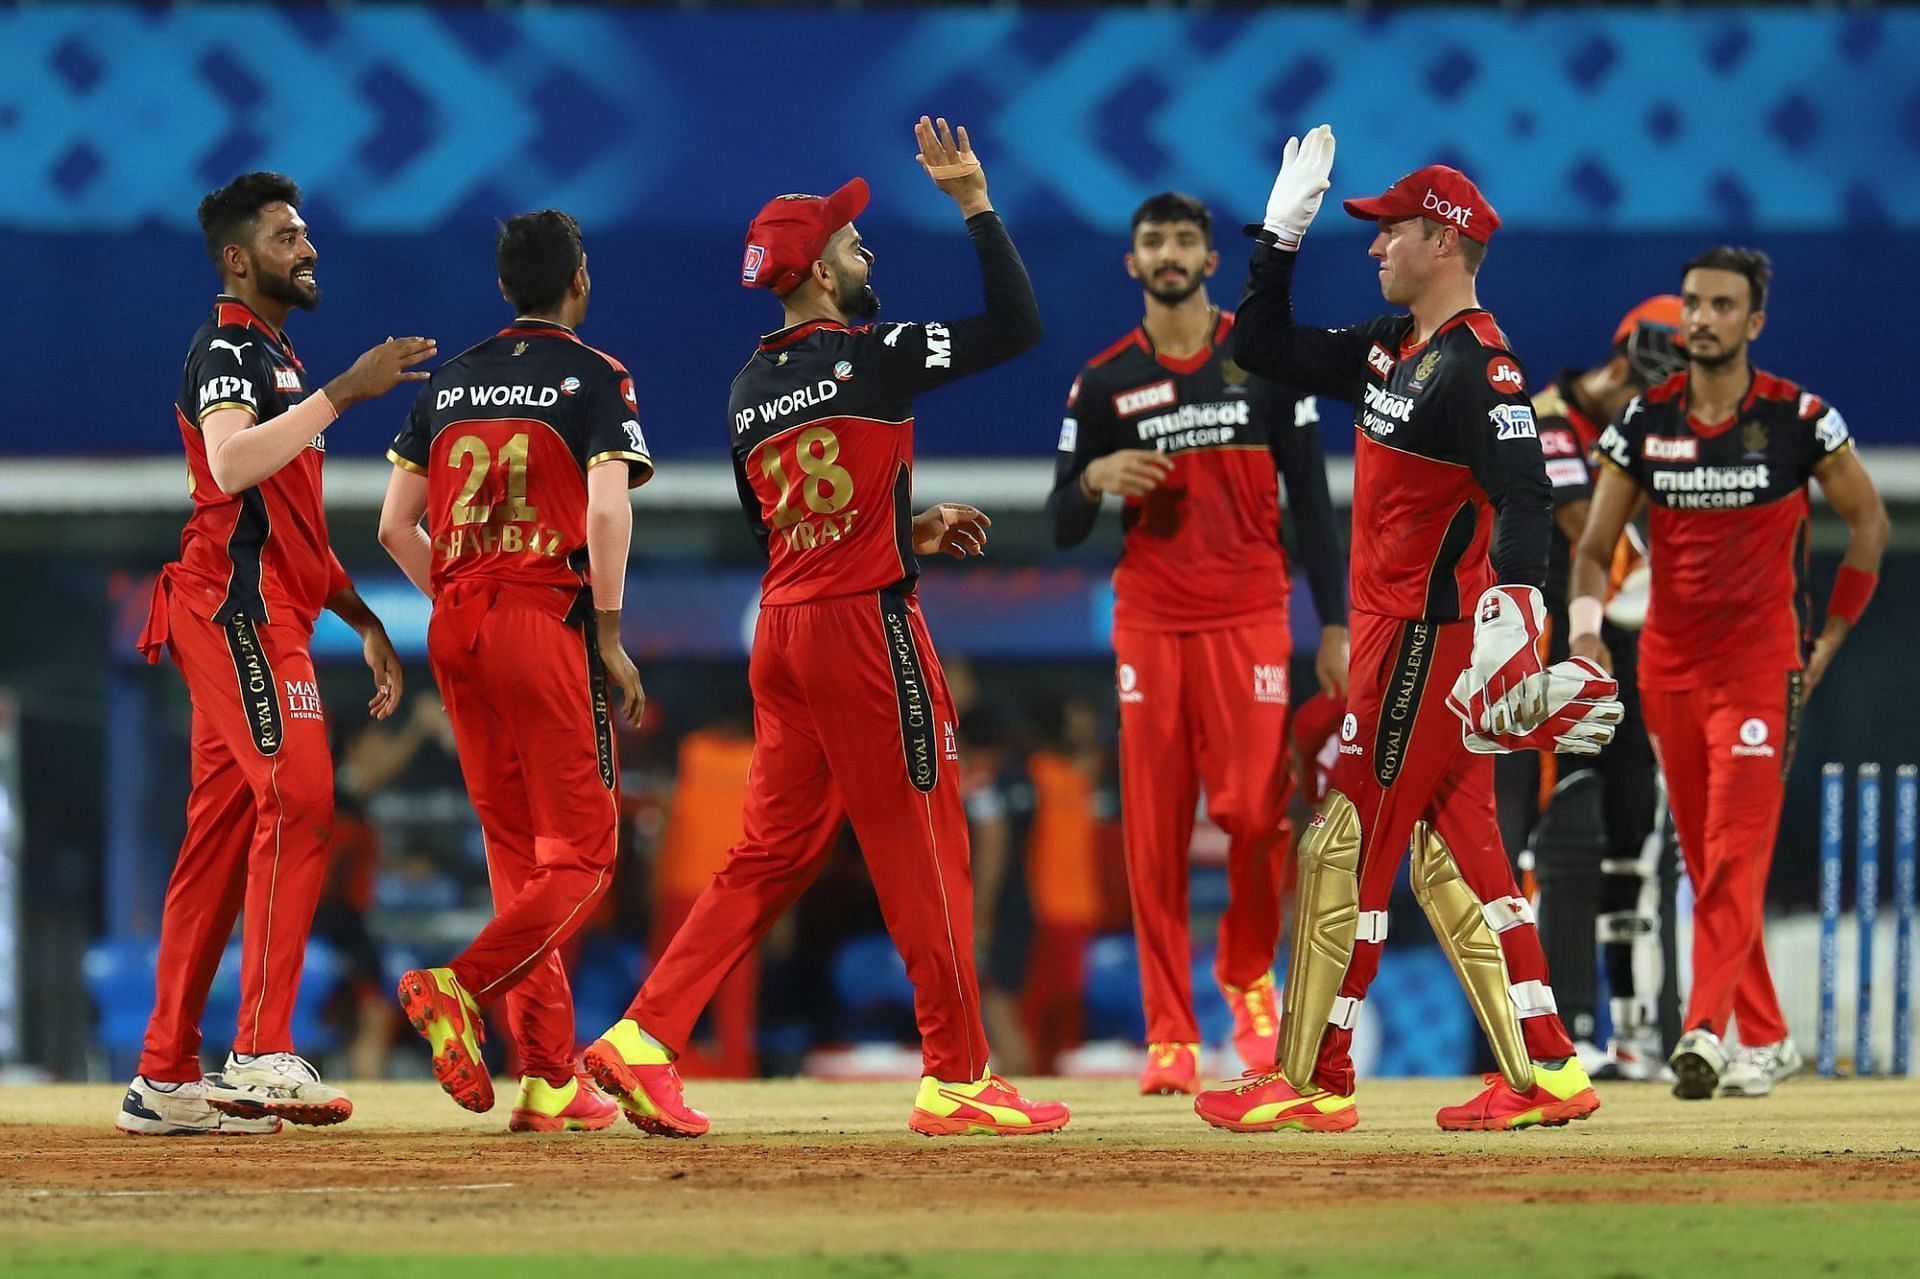 RCB are yet to win the IPL. Pic: IPLT20.COM